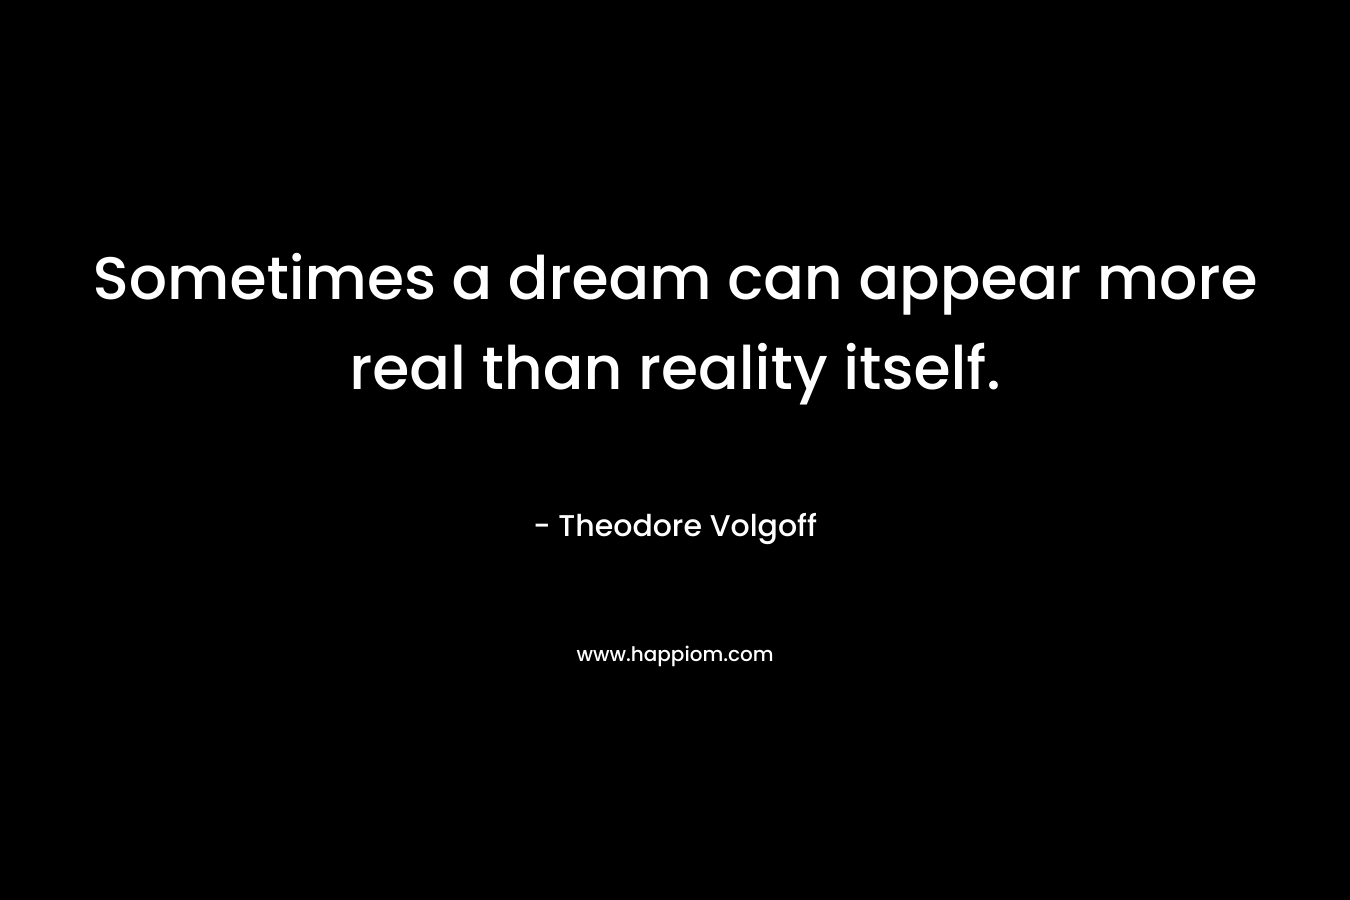 Sometimes a dream can appear more real than reality itself.